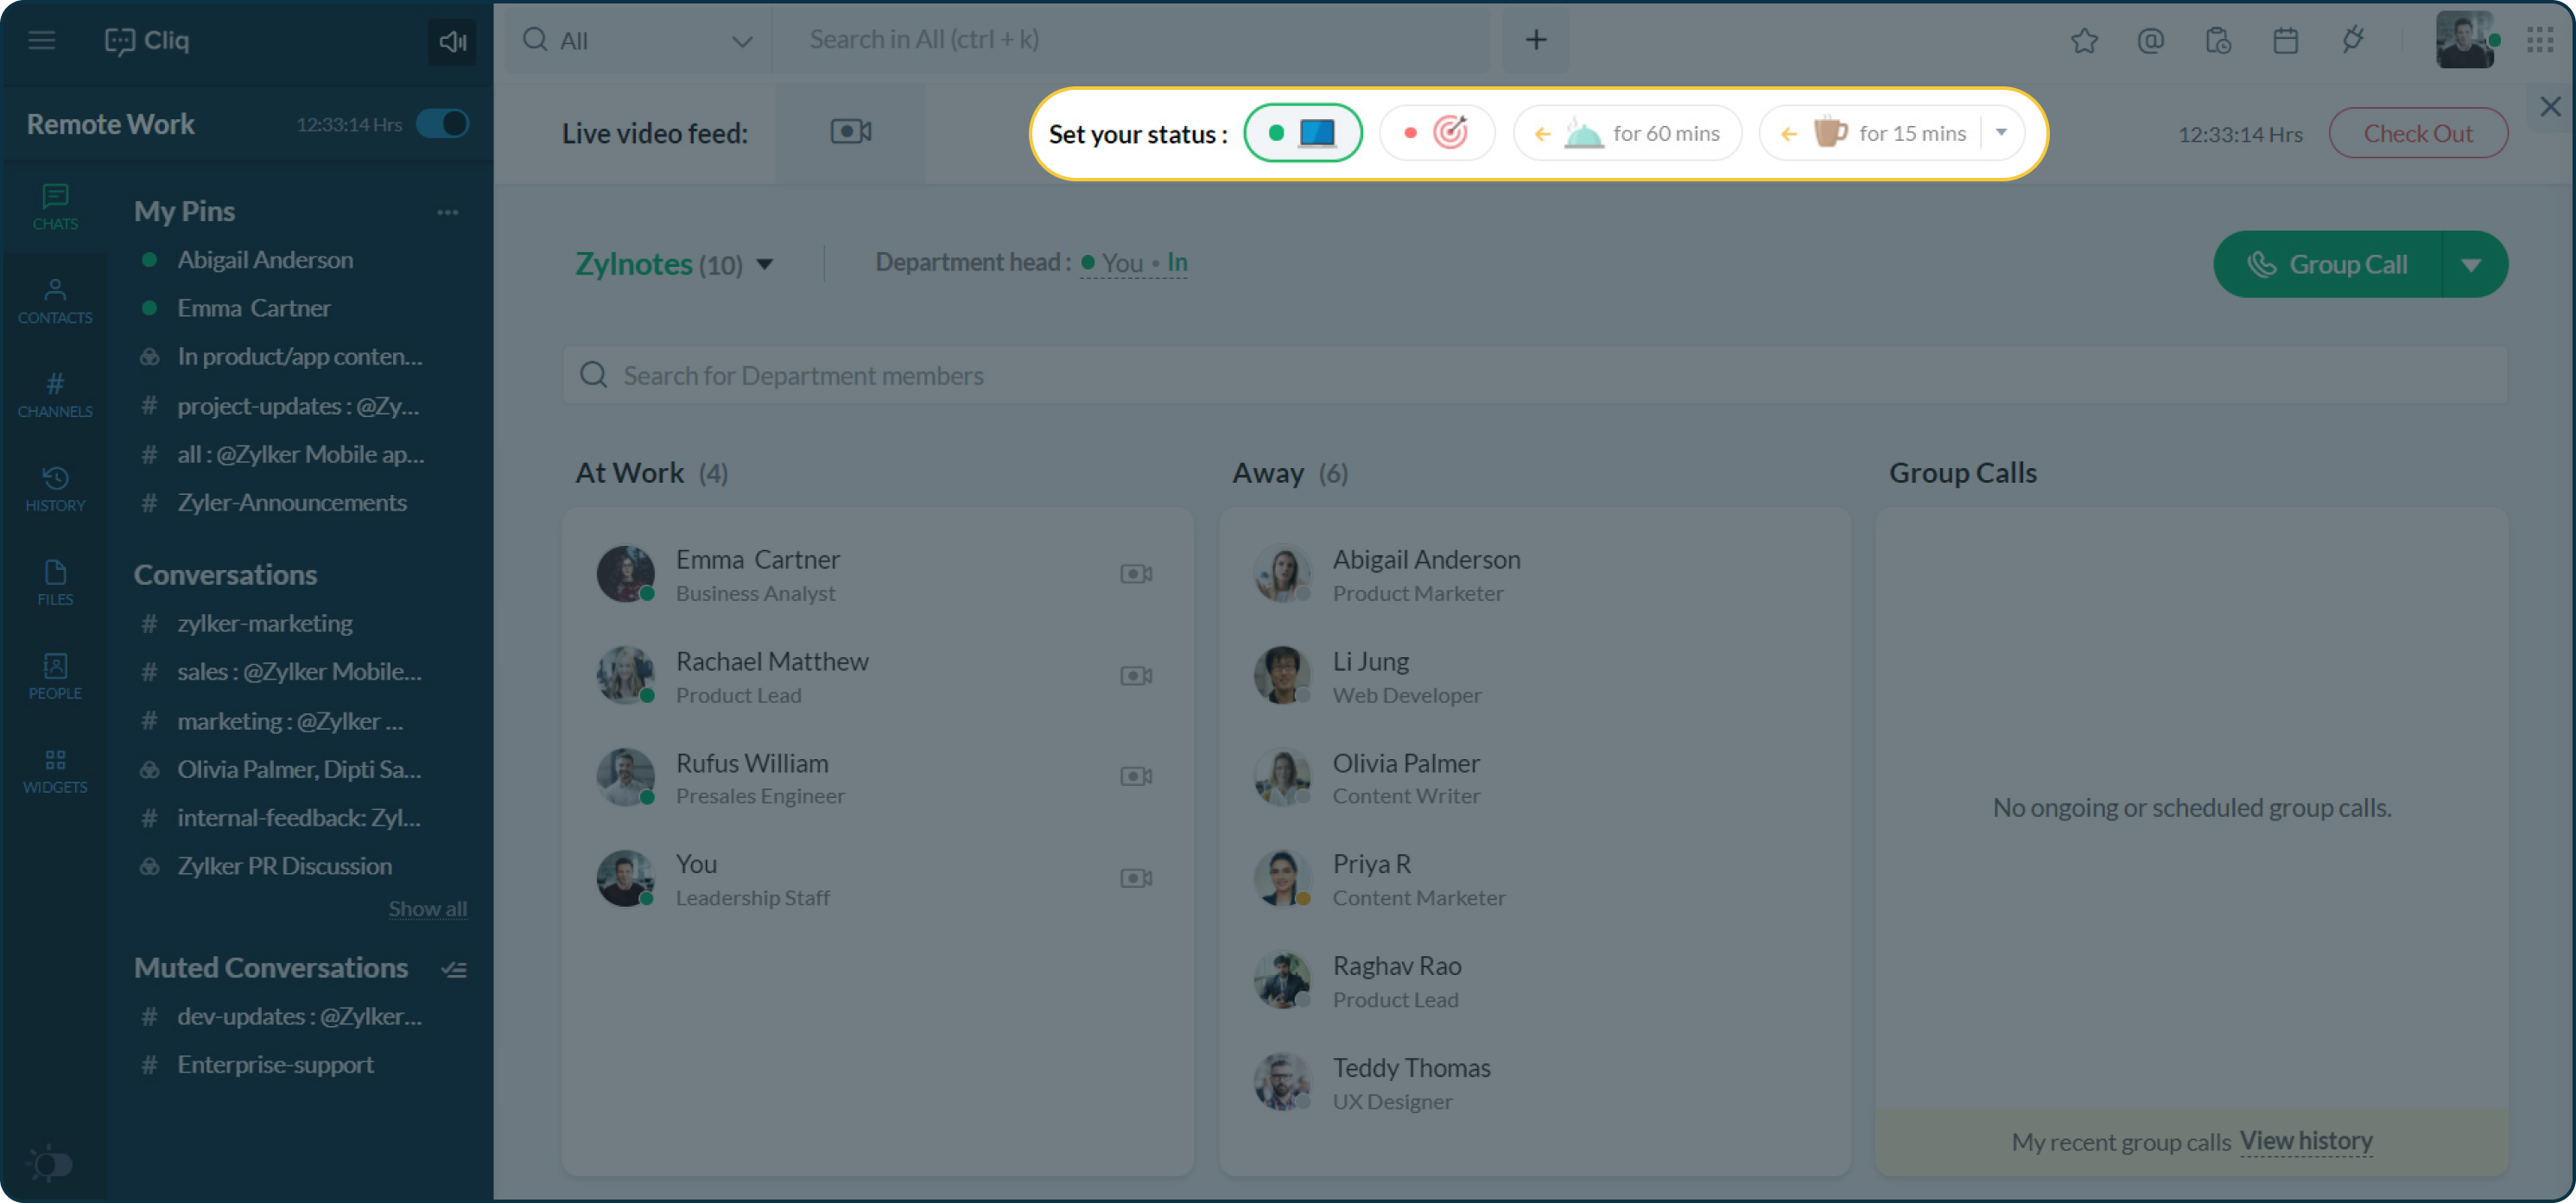 Let your co-workers know your availability in Cliq using Remote work statuses.​